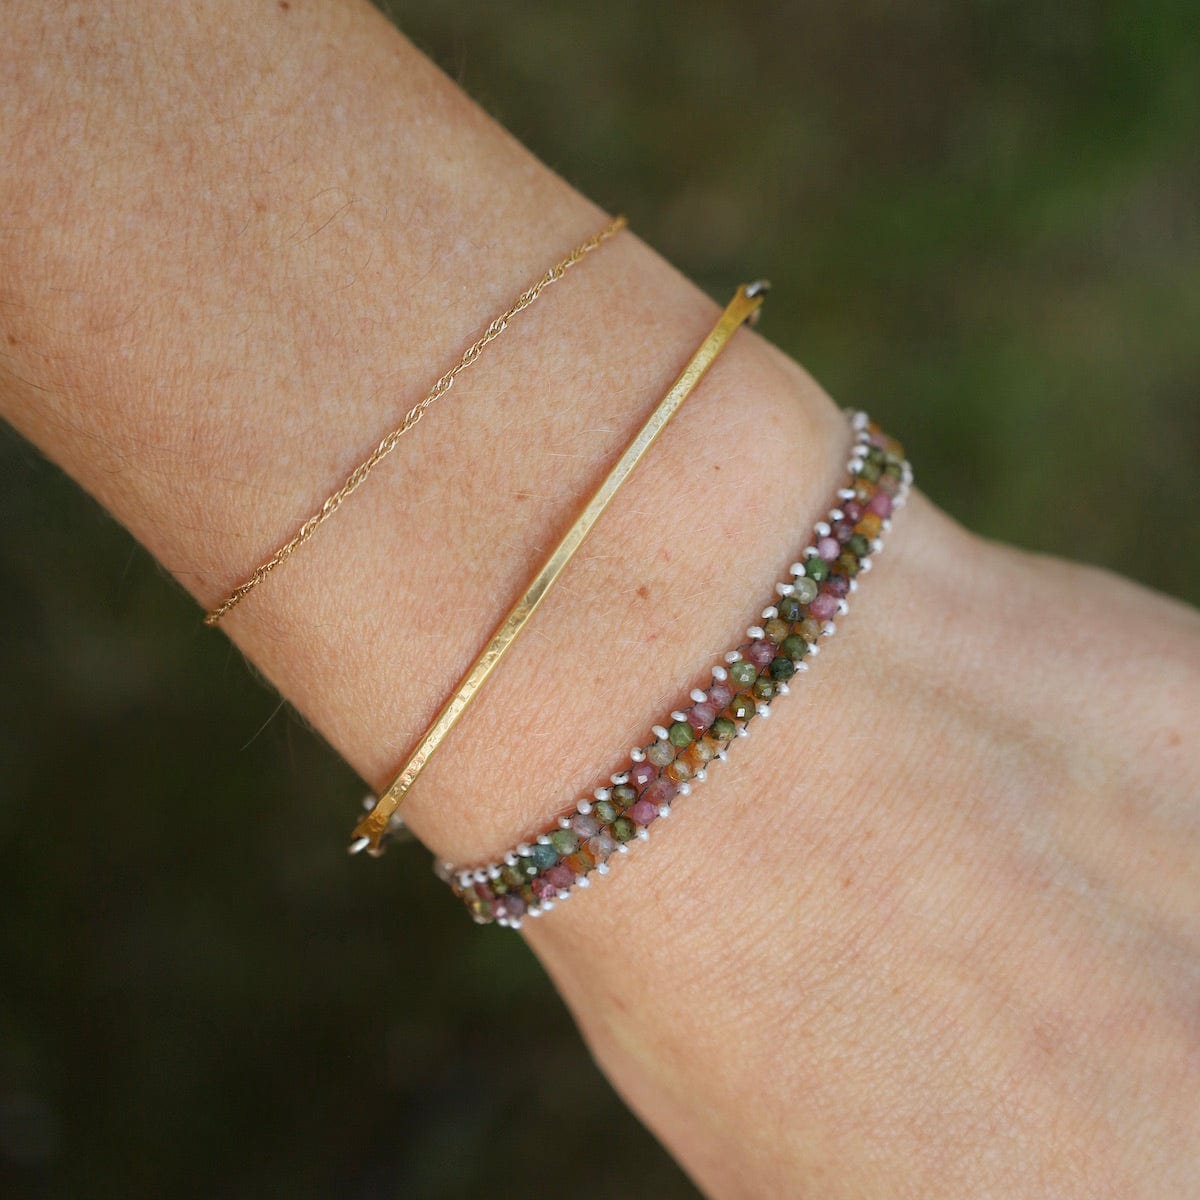 BRC-JM Hand Woven Soft Bracelet of Tourmaline with Tiny Pearls